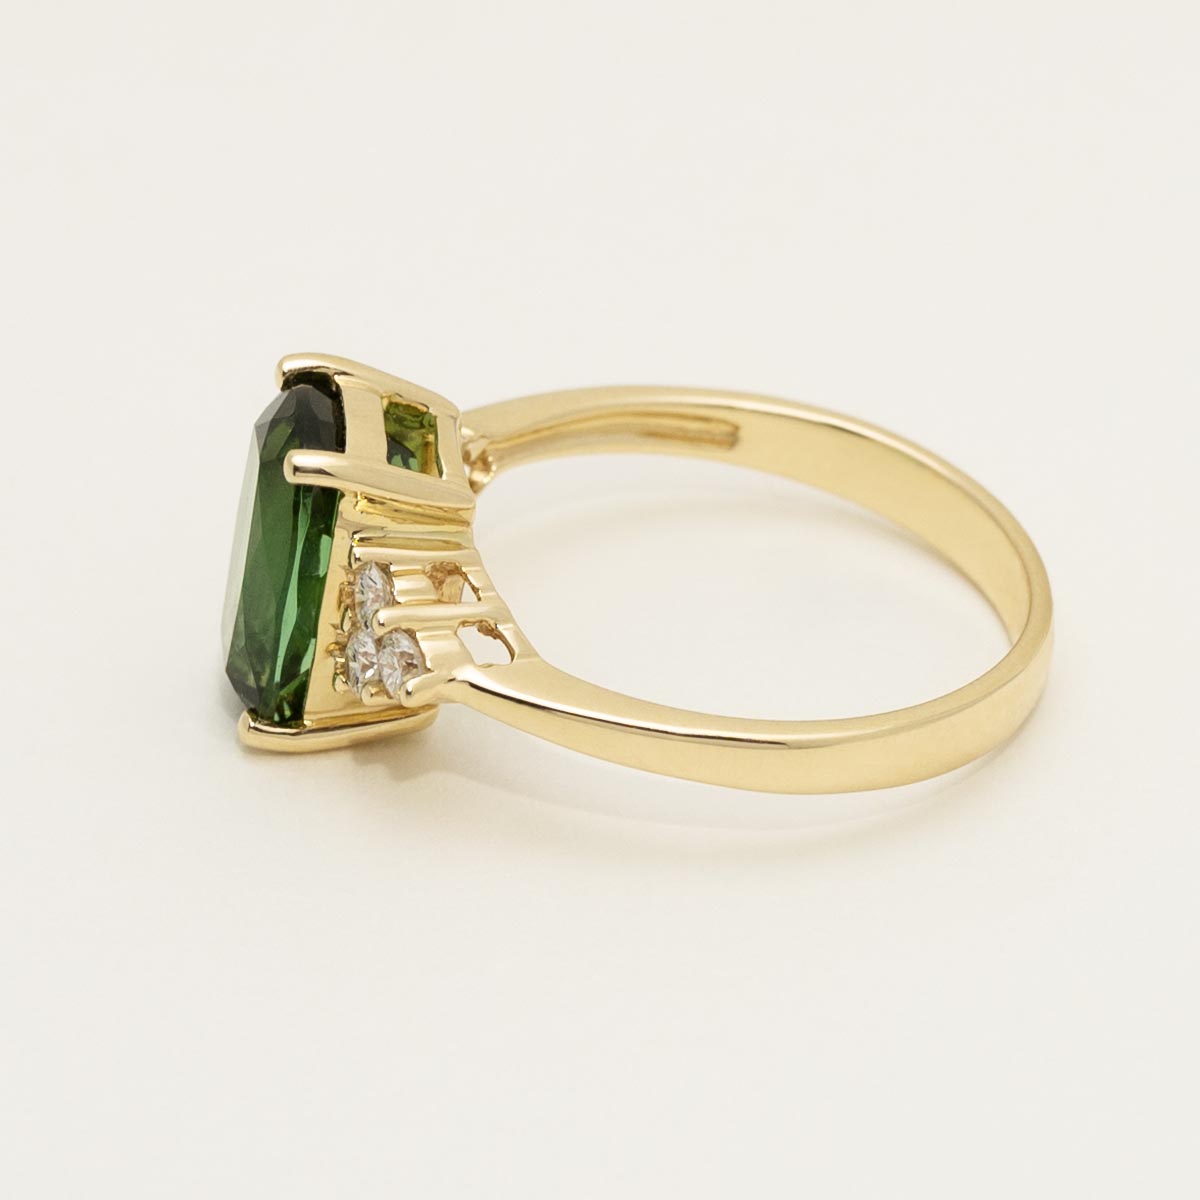 Cushion Cut Green Tourmaline Ring in 18kt Yellow Gold with Diamonds (1/4ct tw)